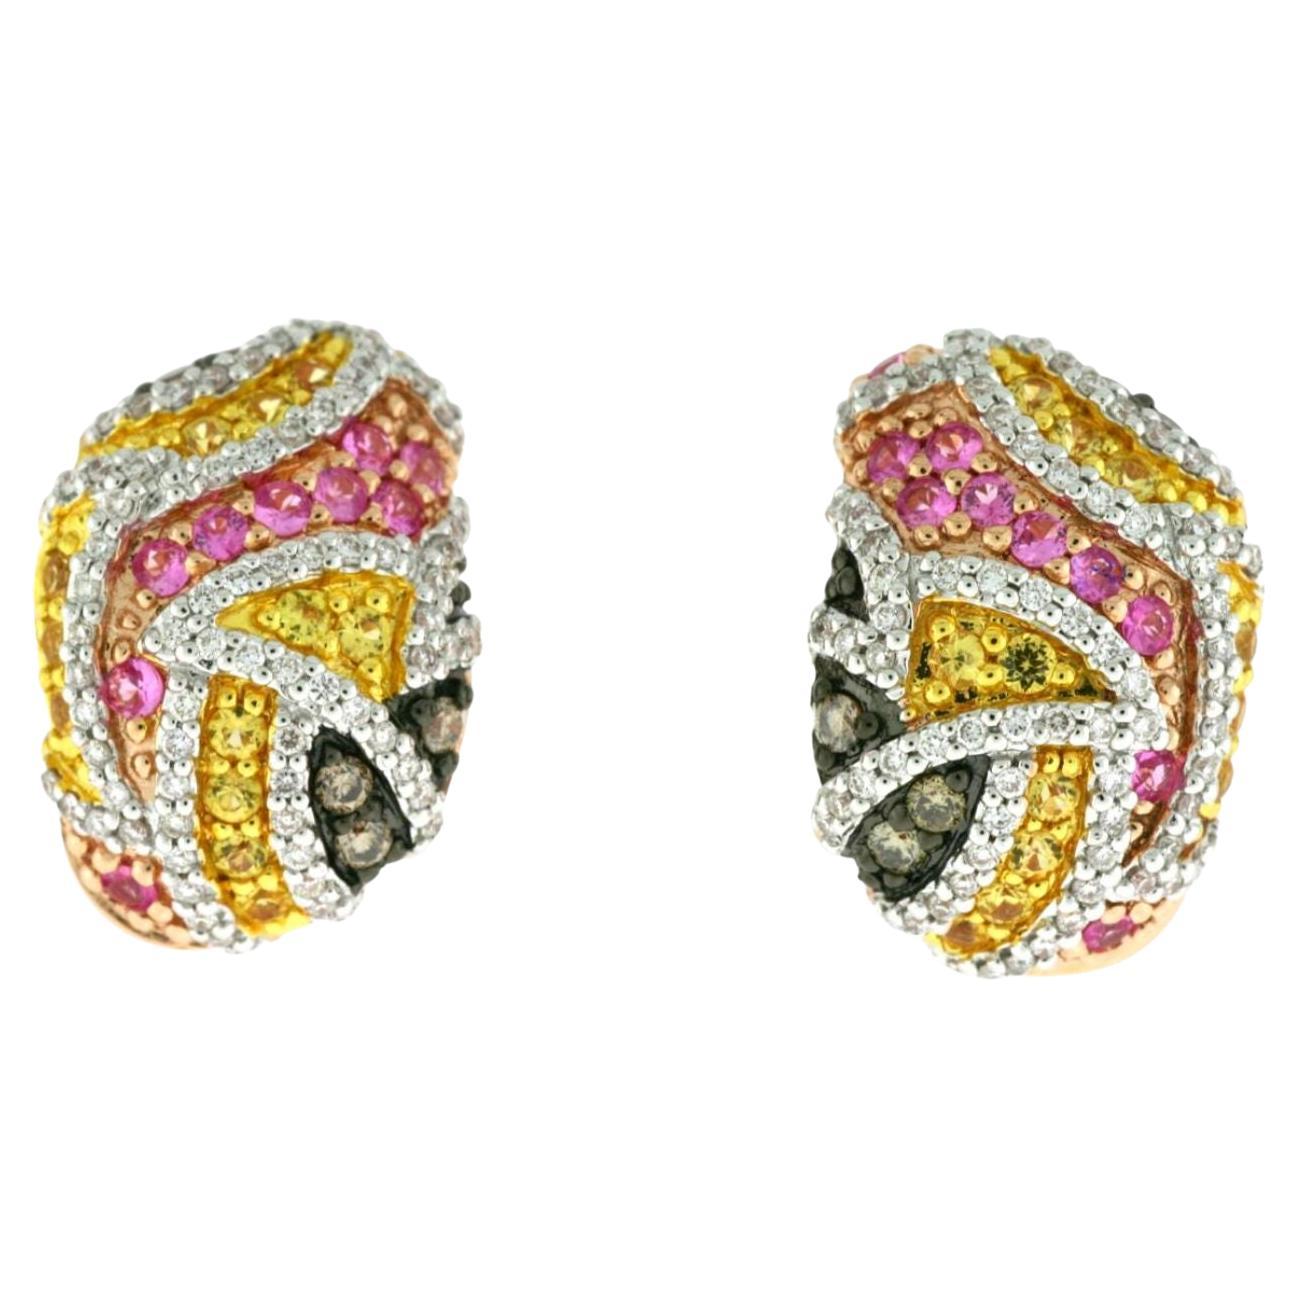 Levian Yellow Sapphire And Diamond Earrings In 14K Rose Gold